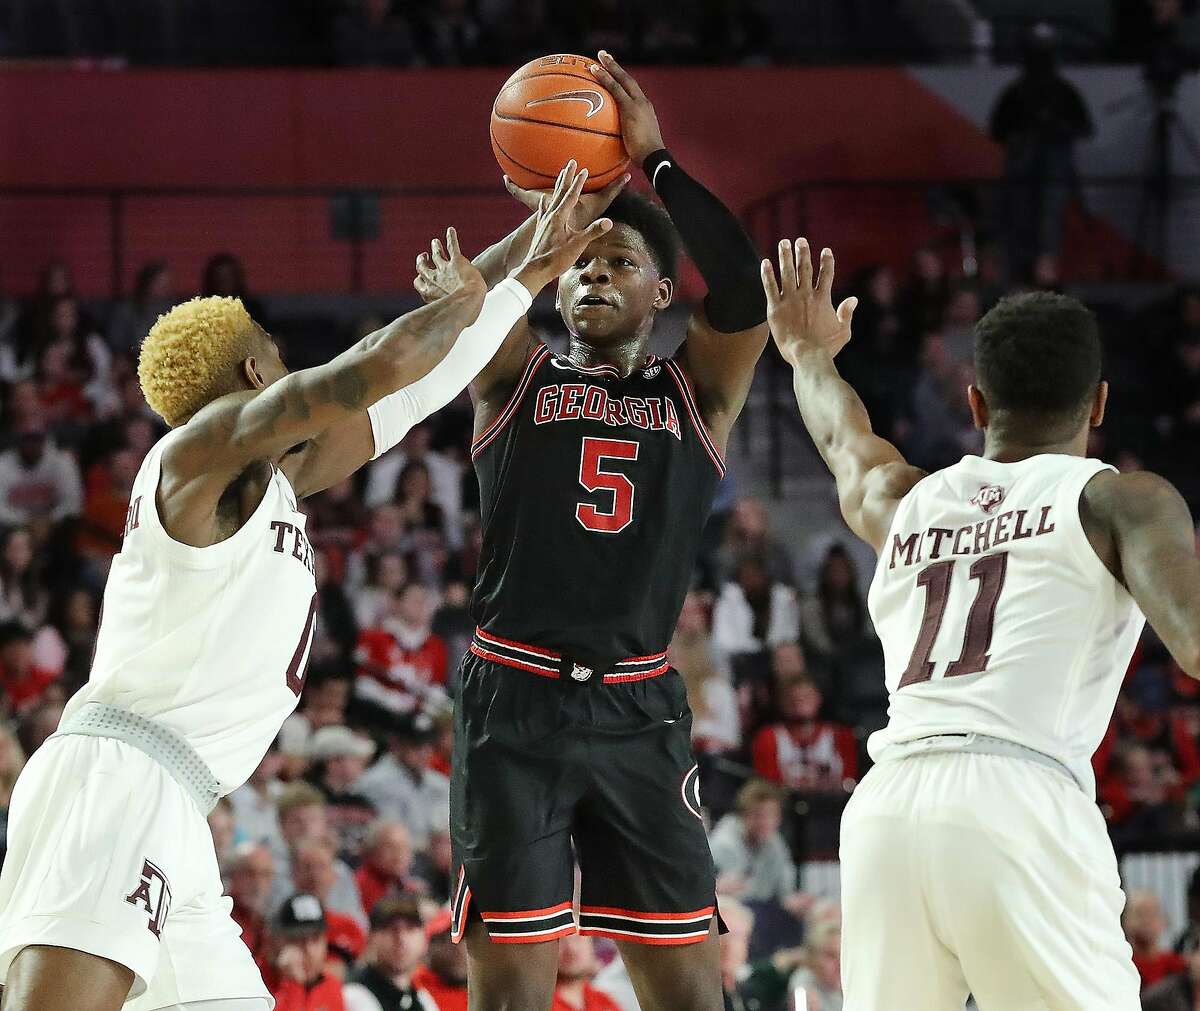 Georgia's Anthony Edwards shoots over a double-team by Texas A&M's Jay Jay Chandler, left, and Wendell Mitchell (11) during the first half on Saturday, Feb. 1, 2020, at Stegeman Coliseum in Athens, Ga. Georgia won, 63-48. (Curtis Compton/Atlanta Journal-Constitution/TNS)